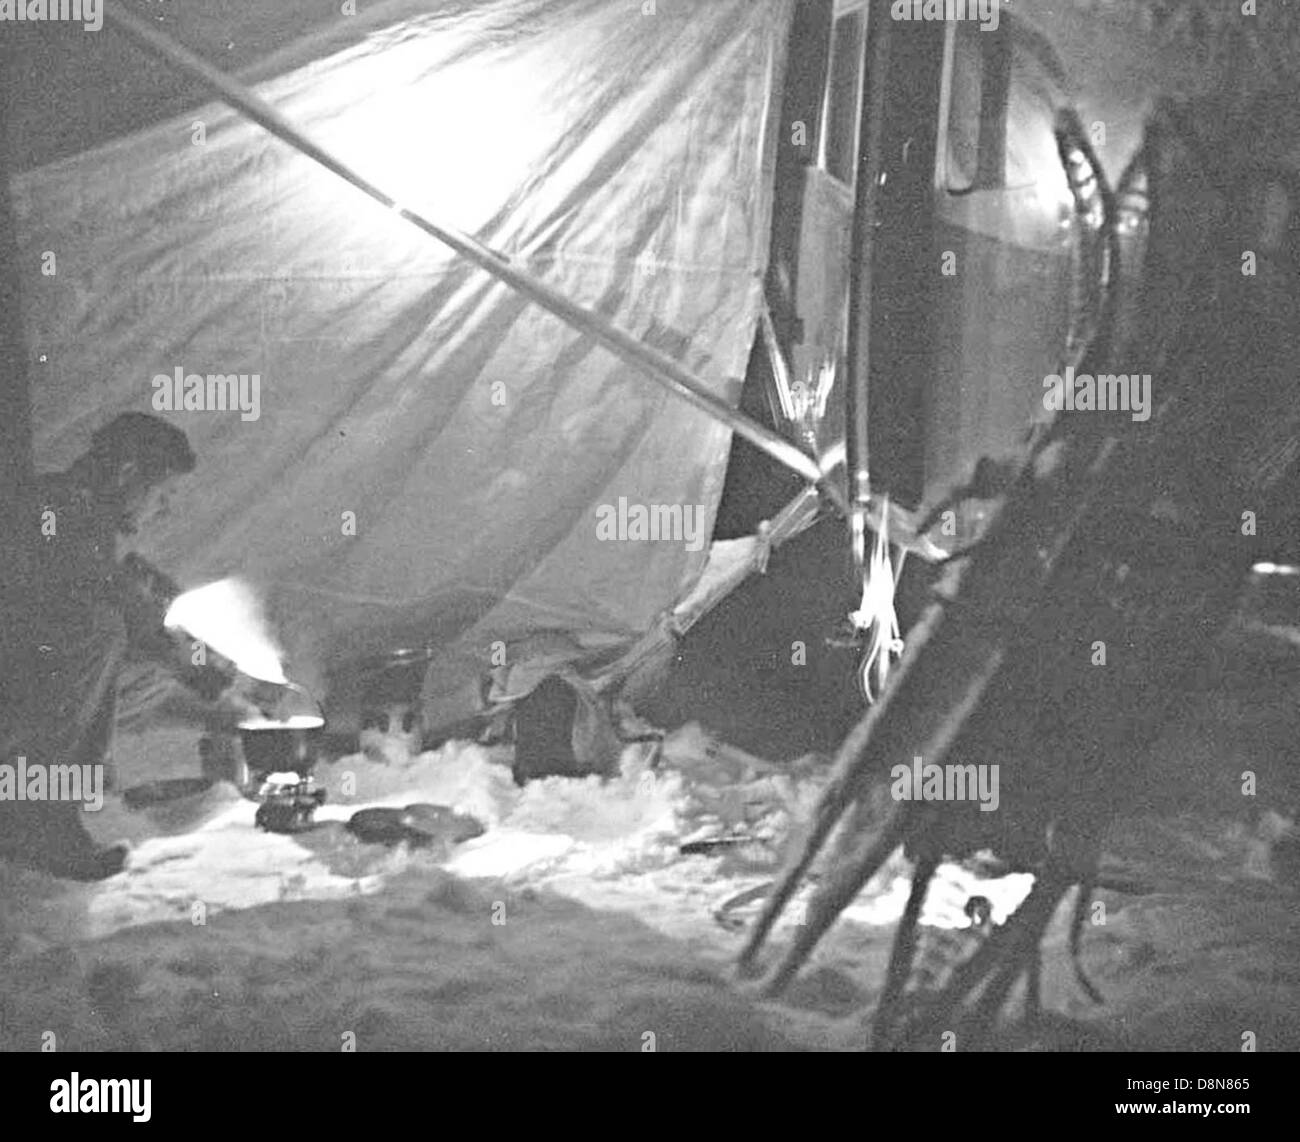 Man bending over cook stove outside plane at night tarp provides protection  Stock Photo - Alamy